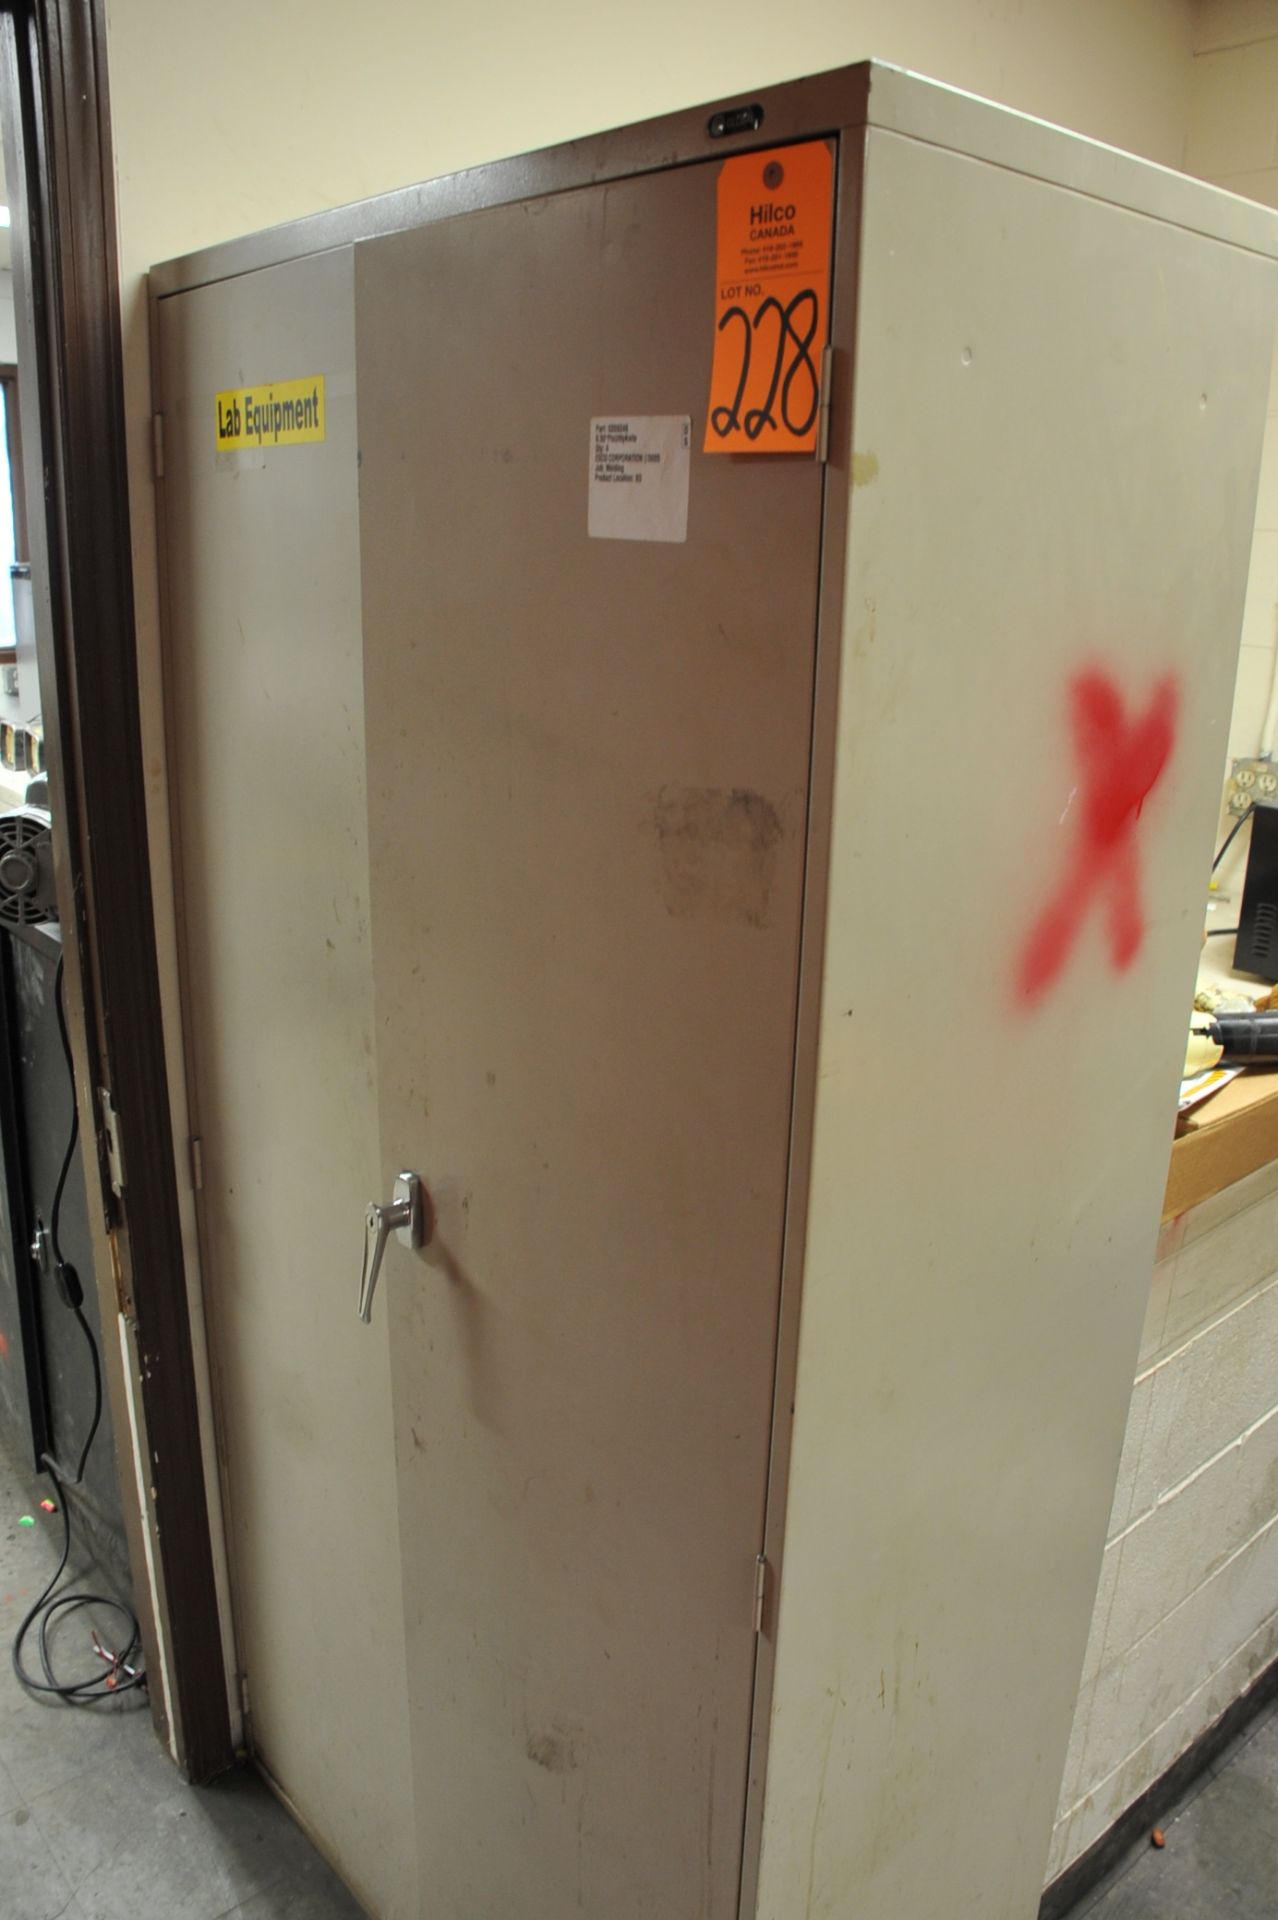 Lot of Asst. Storage Cabinets, Chairs, L-Shaped Desk, First Aid - Image 2 of 4